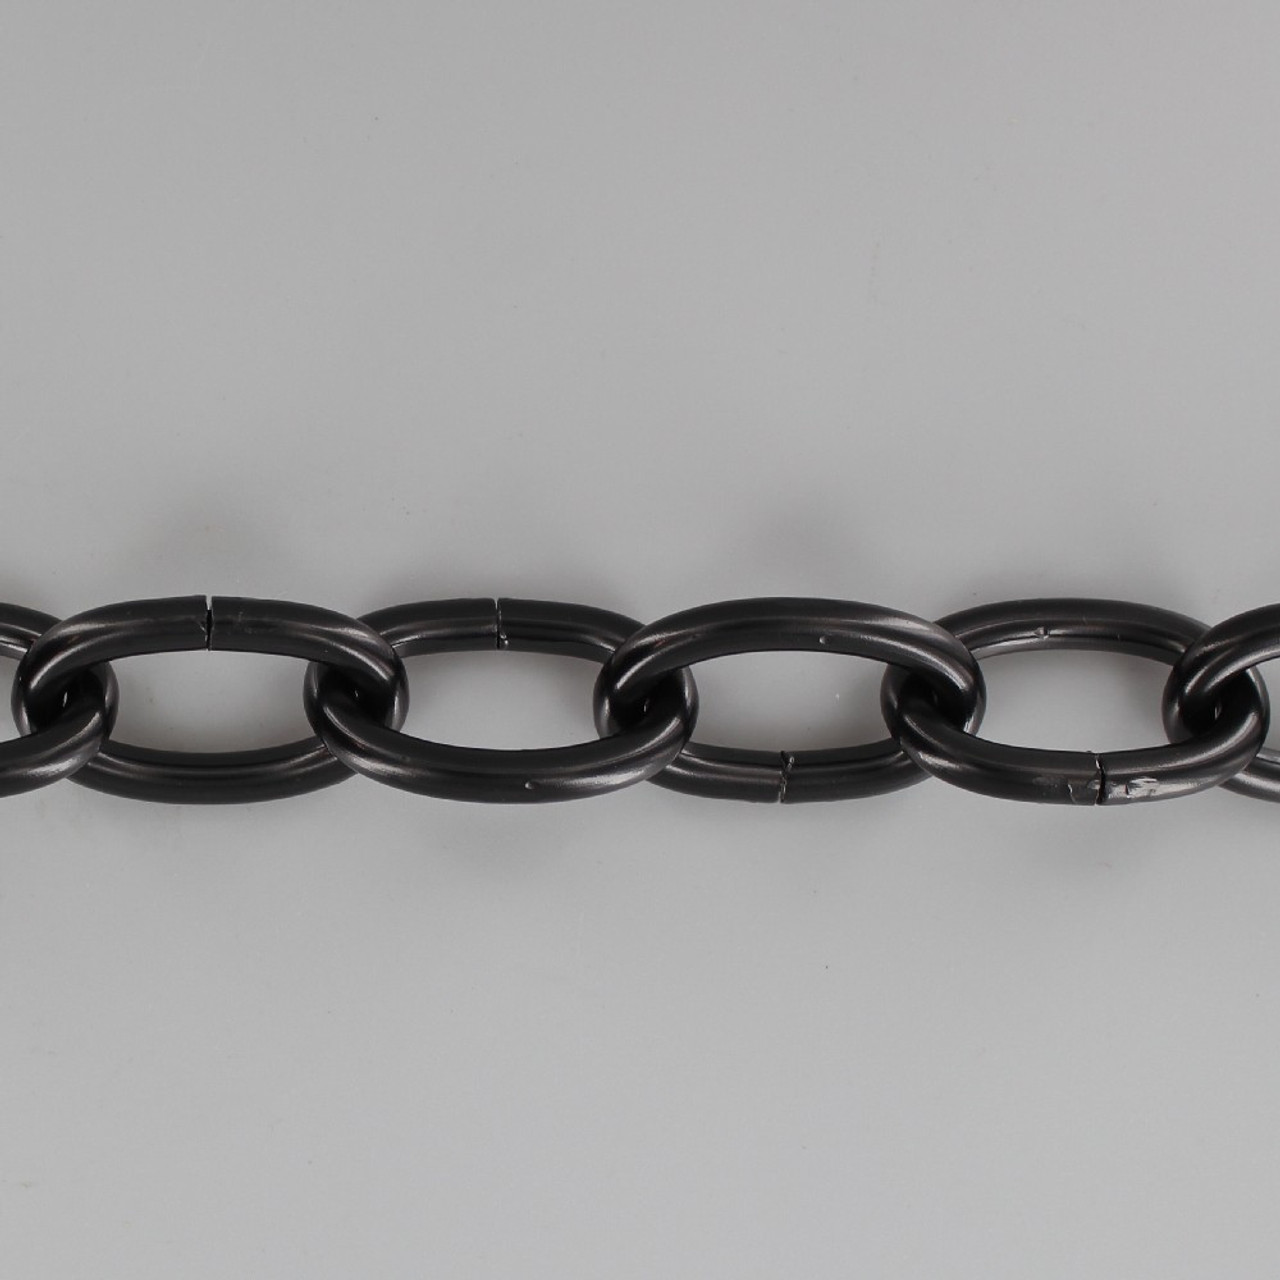 Chains - Chain by Type - Powder Coated - Black - 1st Chain Supply